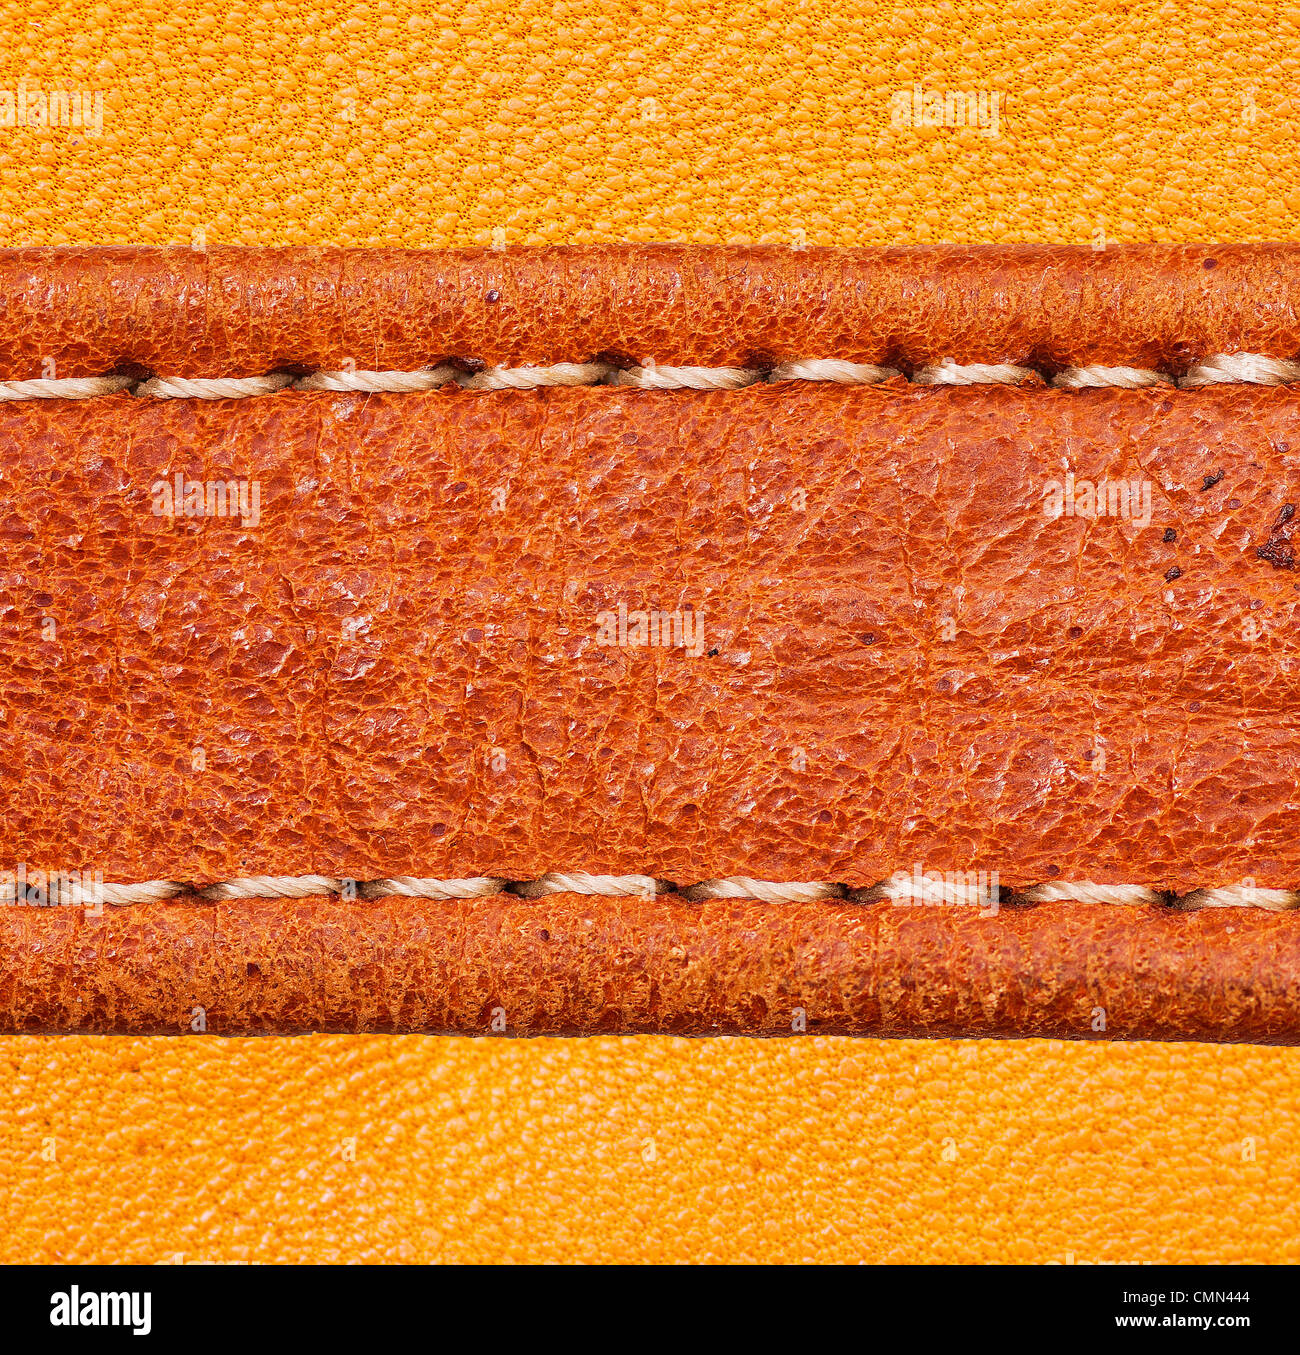 A brown leather texture. high resolution. Stock Photo